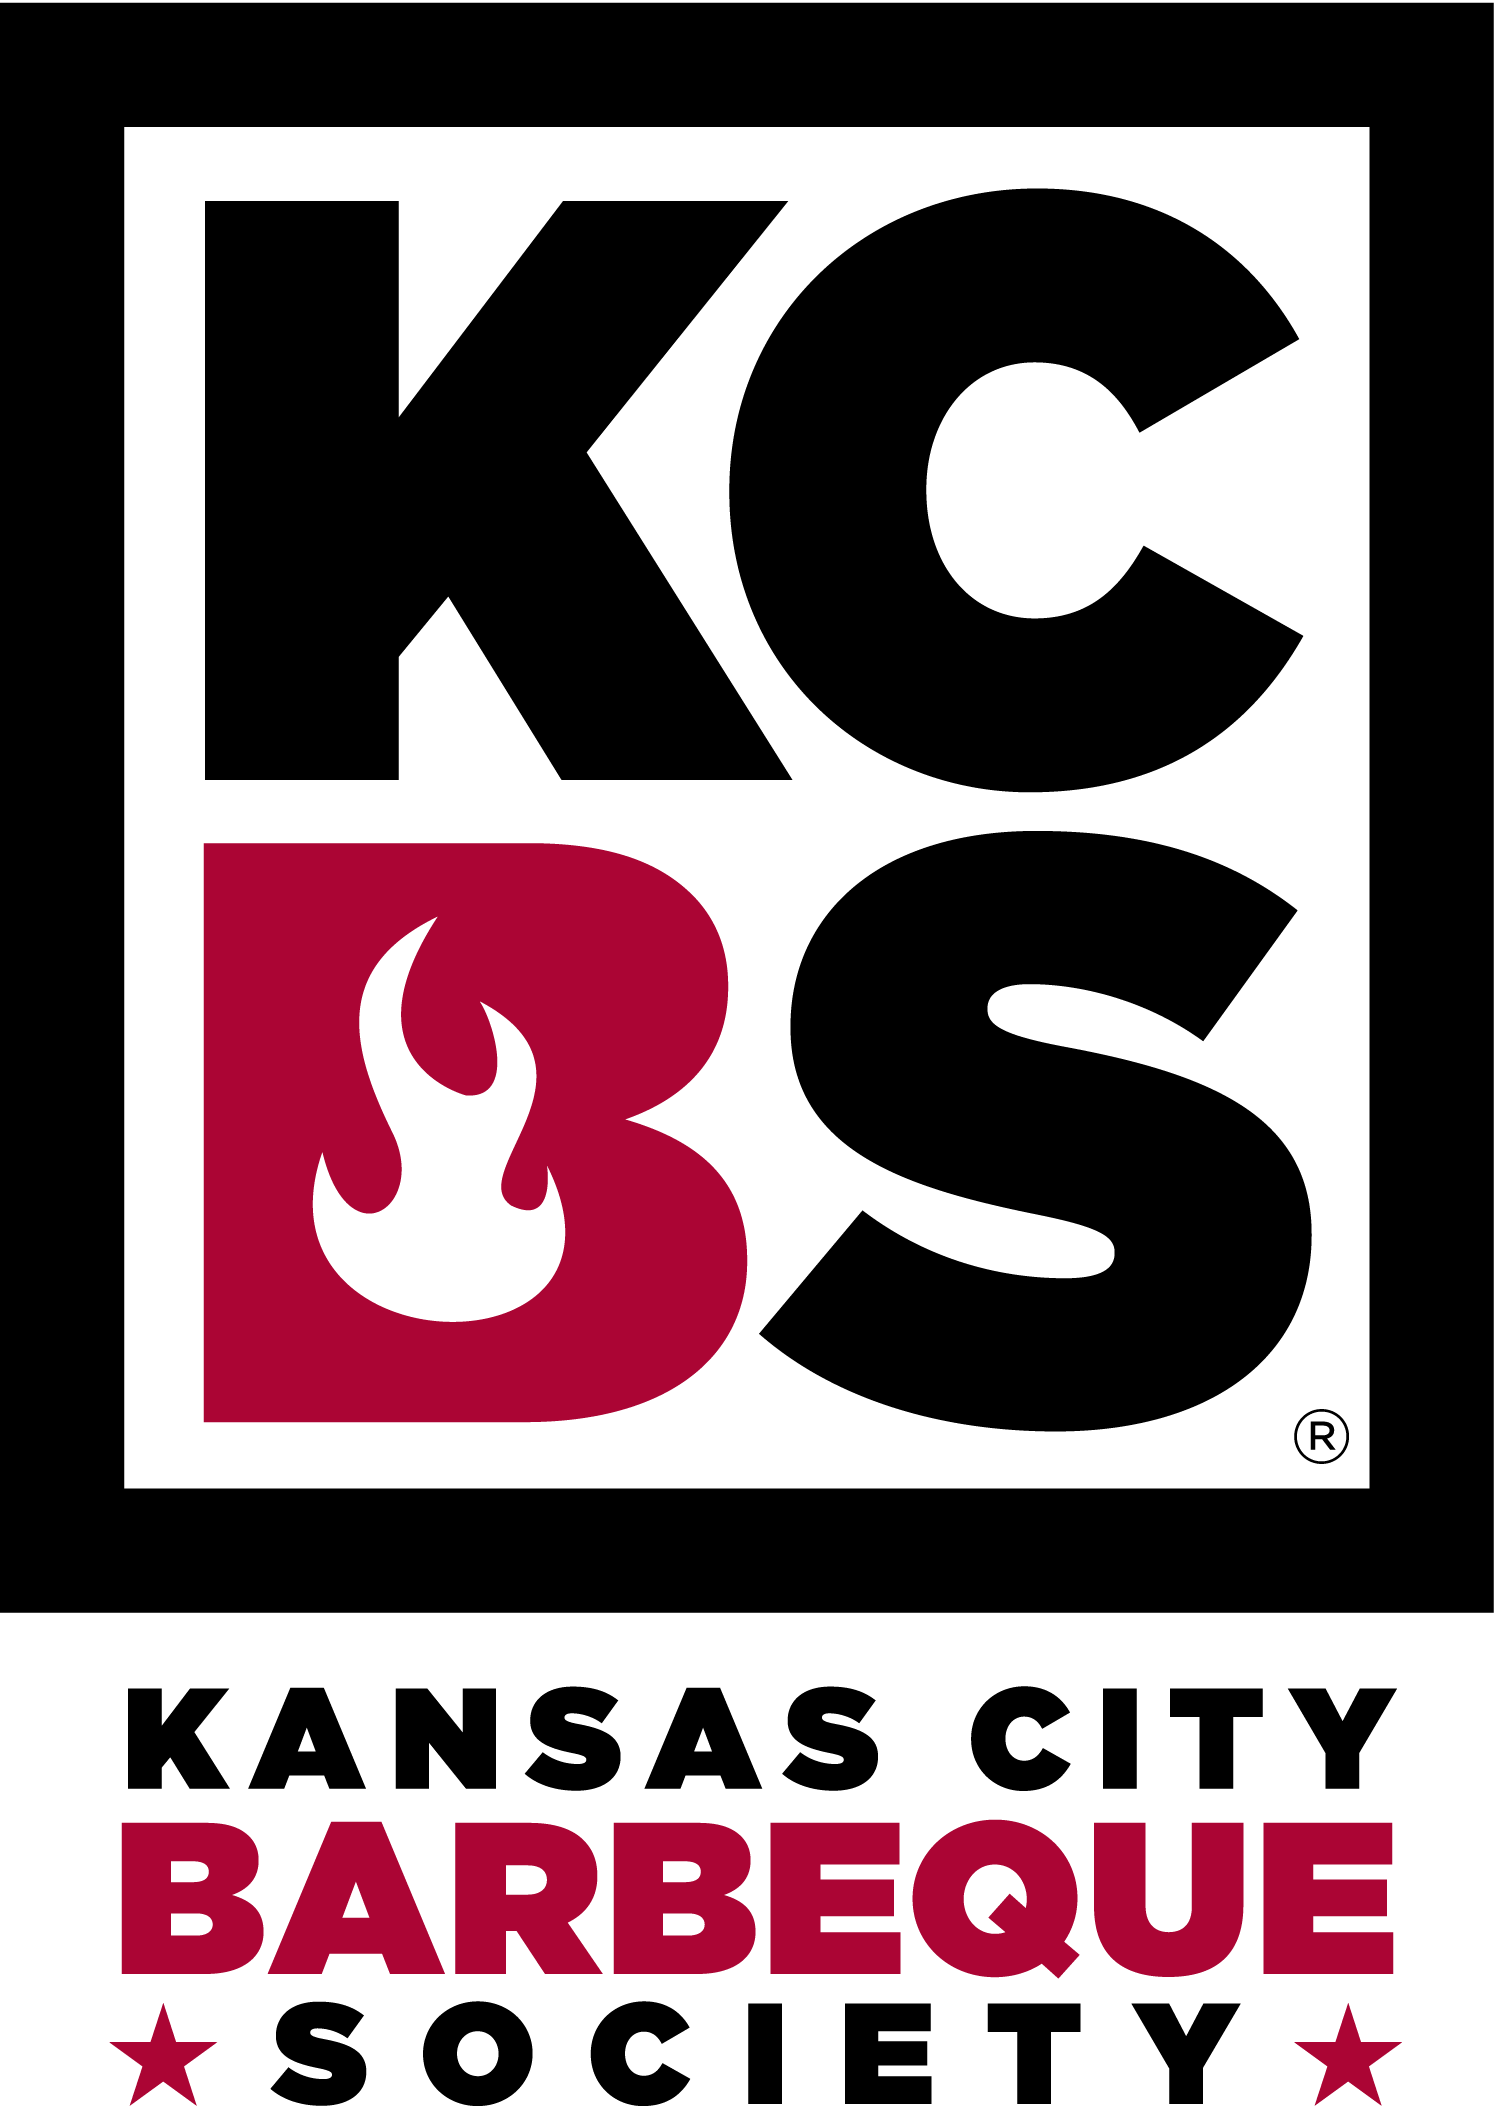 This is the offical Kansas City Barbeque Society Logo